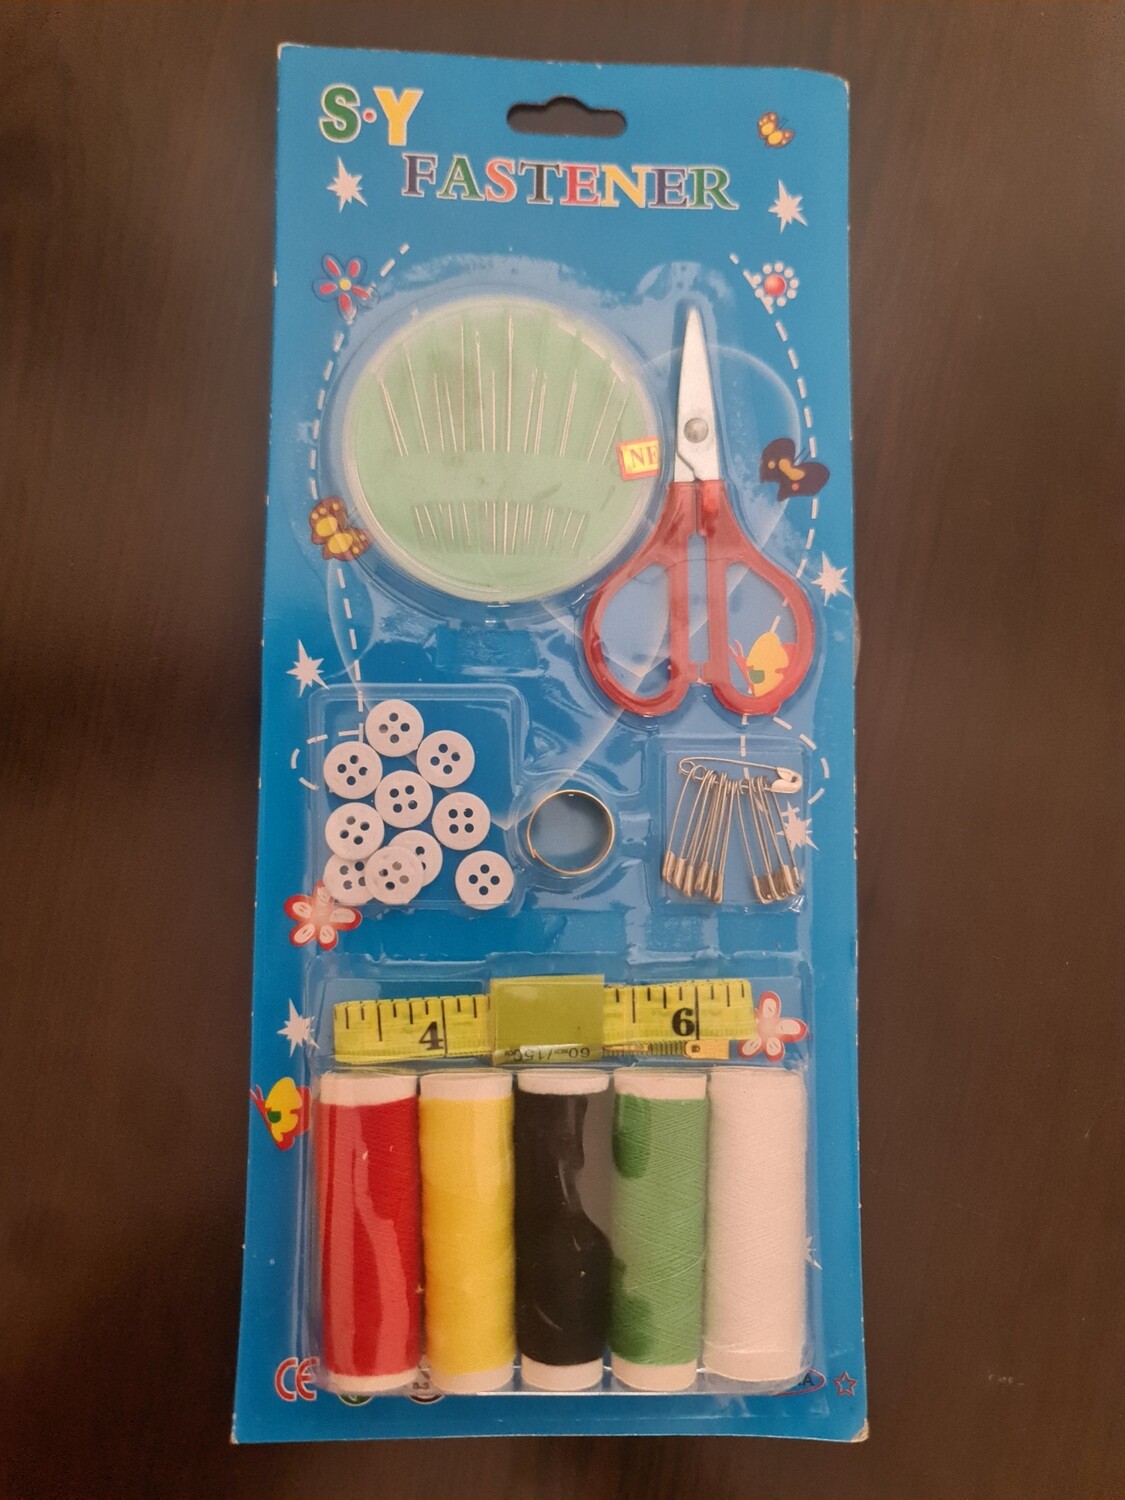 SY sewing kit. 5 thread colors, 16 needles, scissors, 10 pins, 10 buttons, tape measure, fastener on a card NS139256